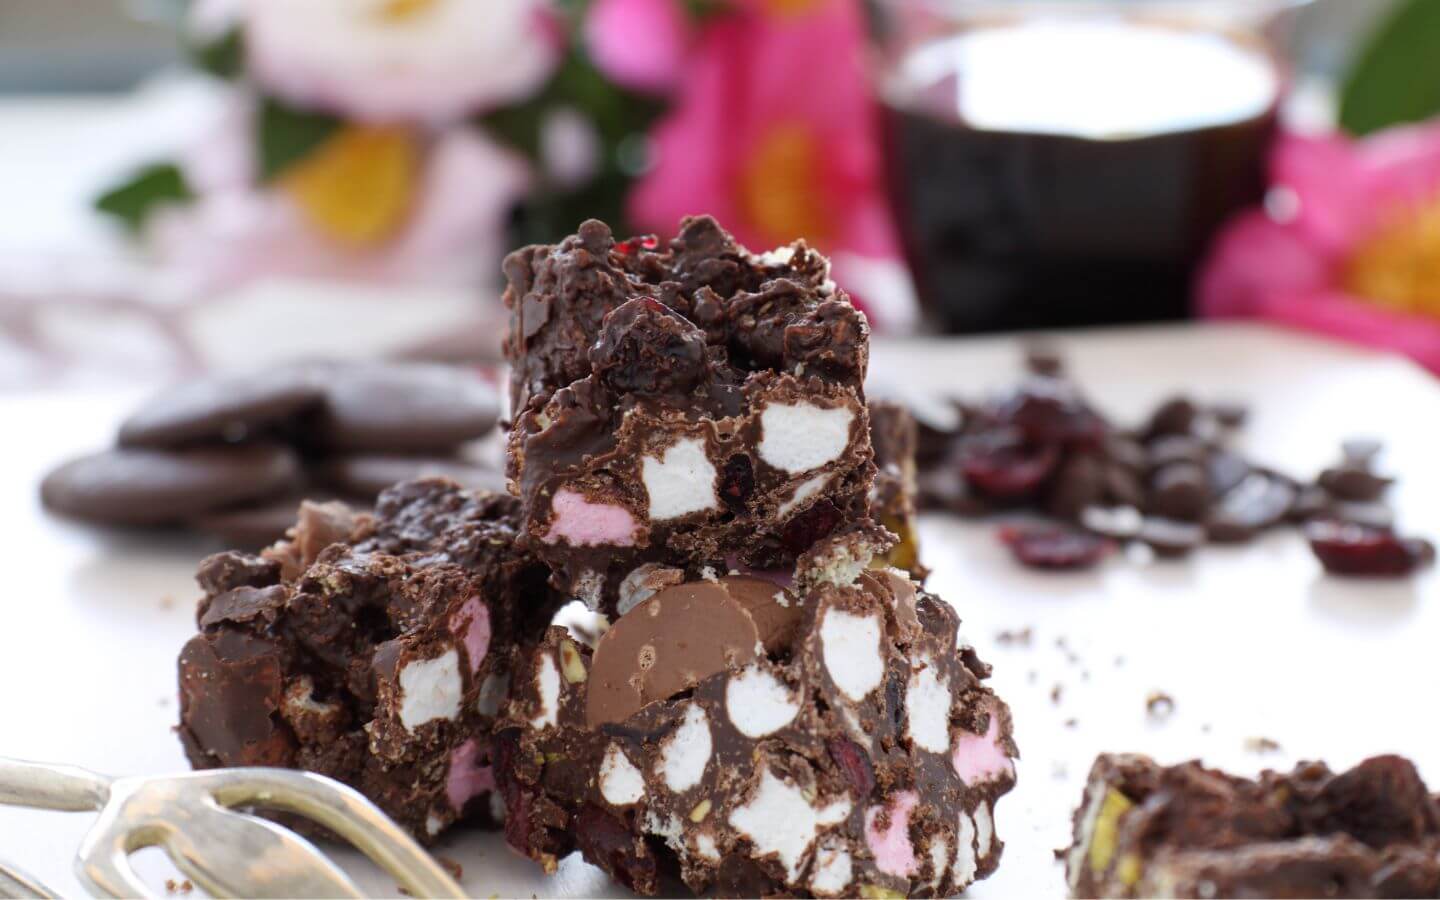 Dark chocolate clusters of rocky road candy, including white and pink marshmallows, nuts, and dried fruit.